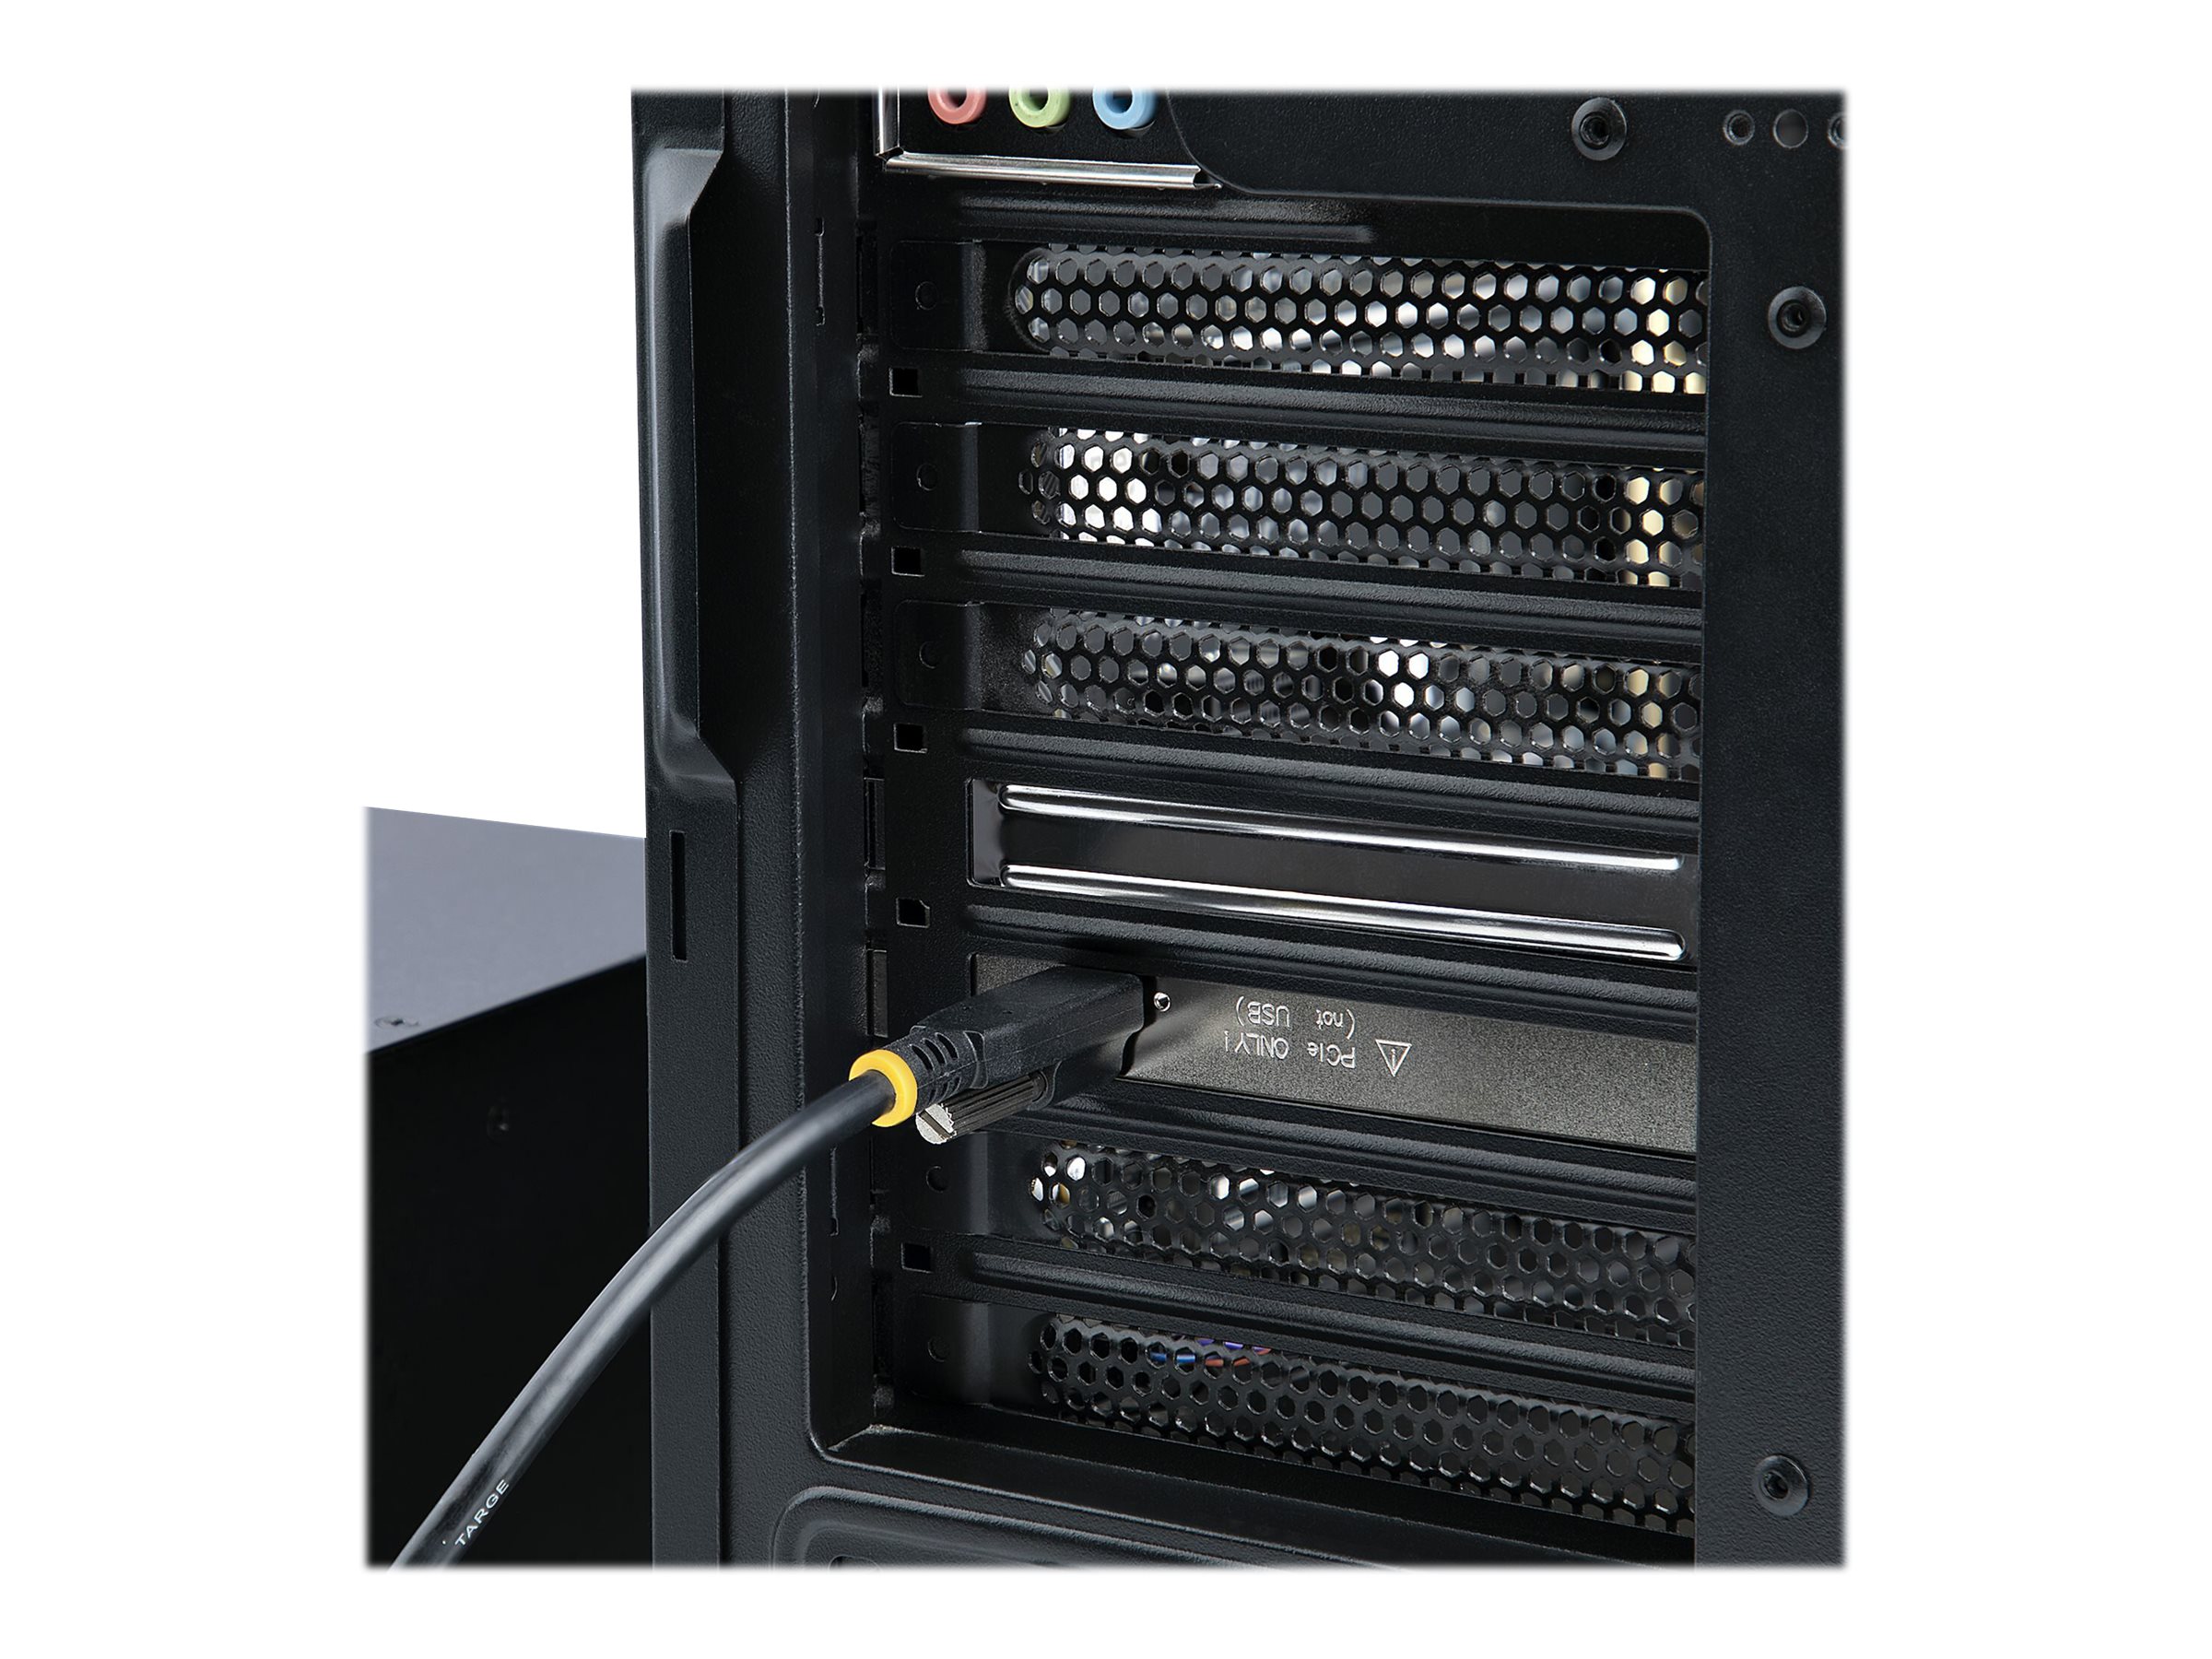 StarTech.com 4-Slot PCIe Expansion Chassis with PCIe x2 Host Card, PCIe 2.0